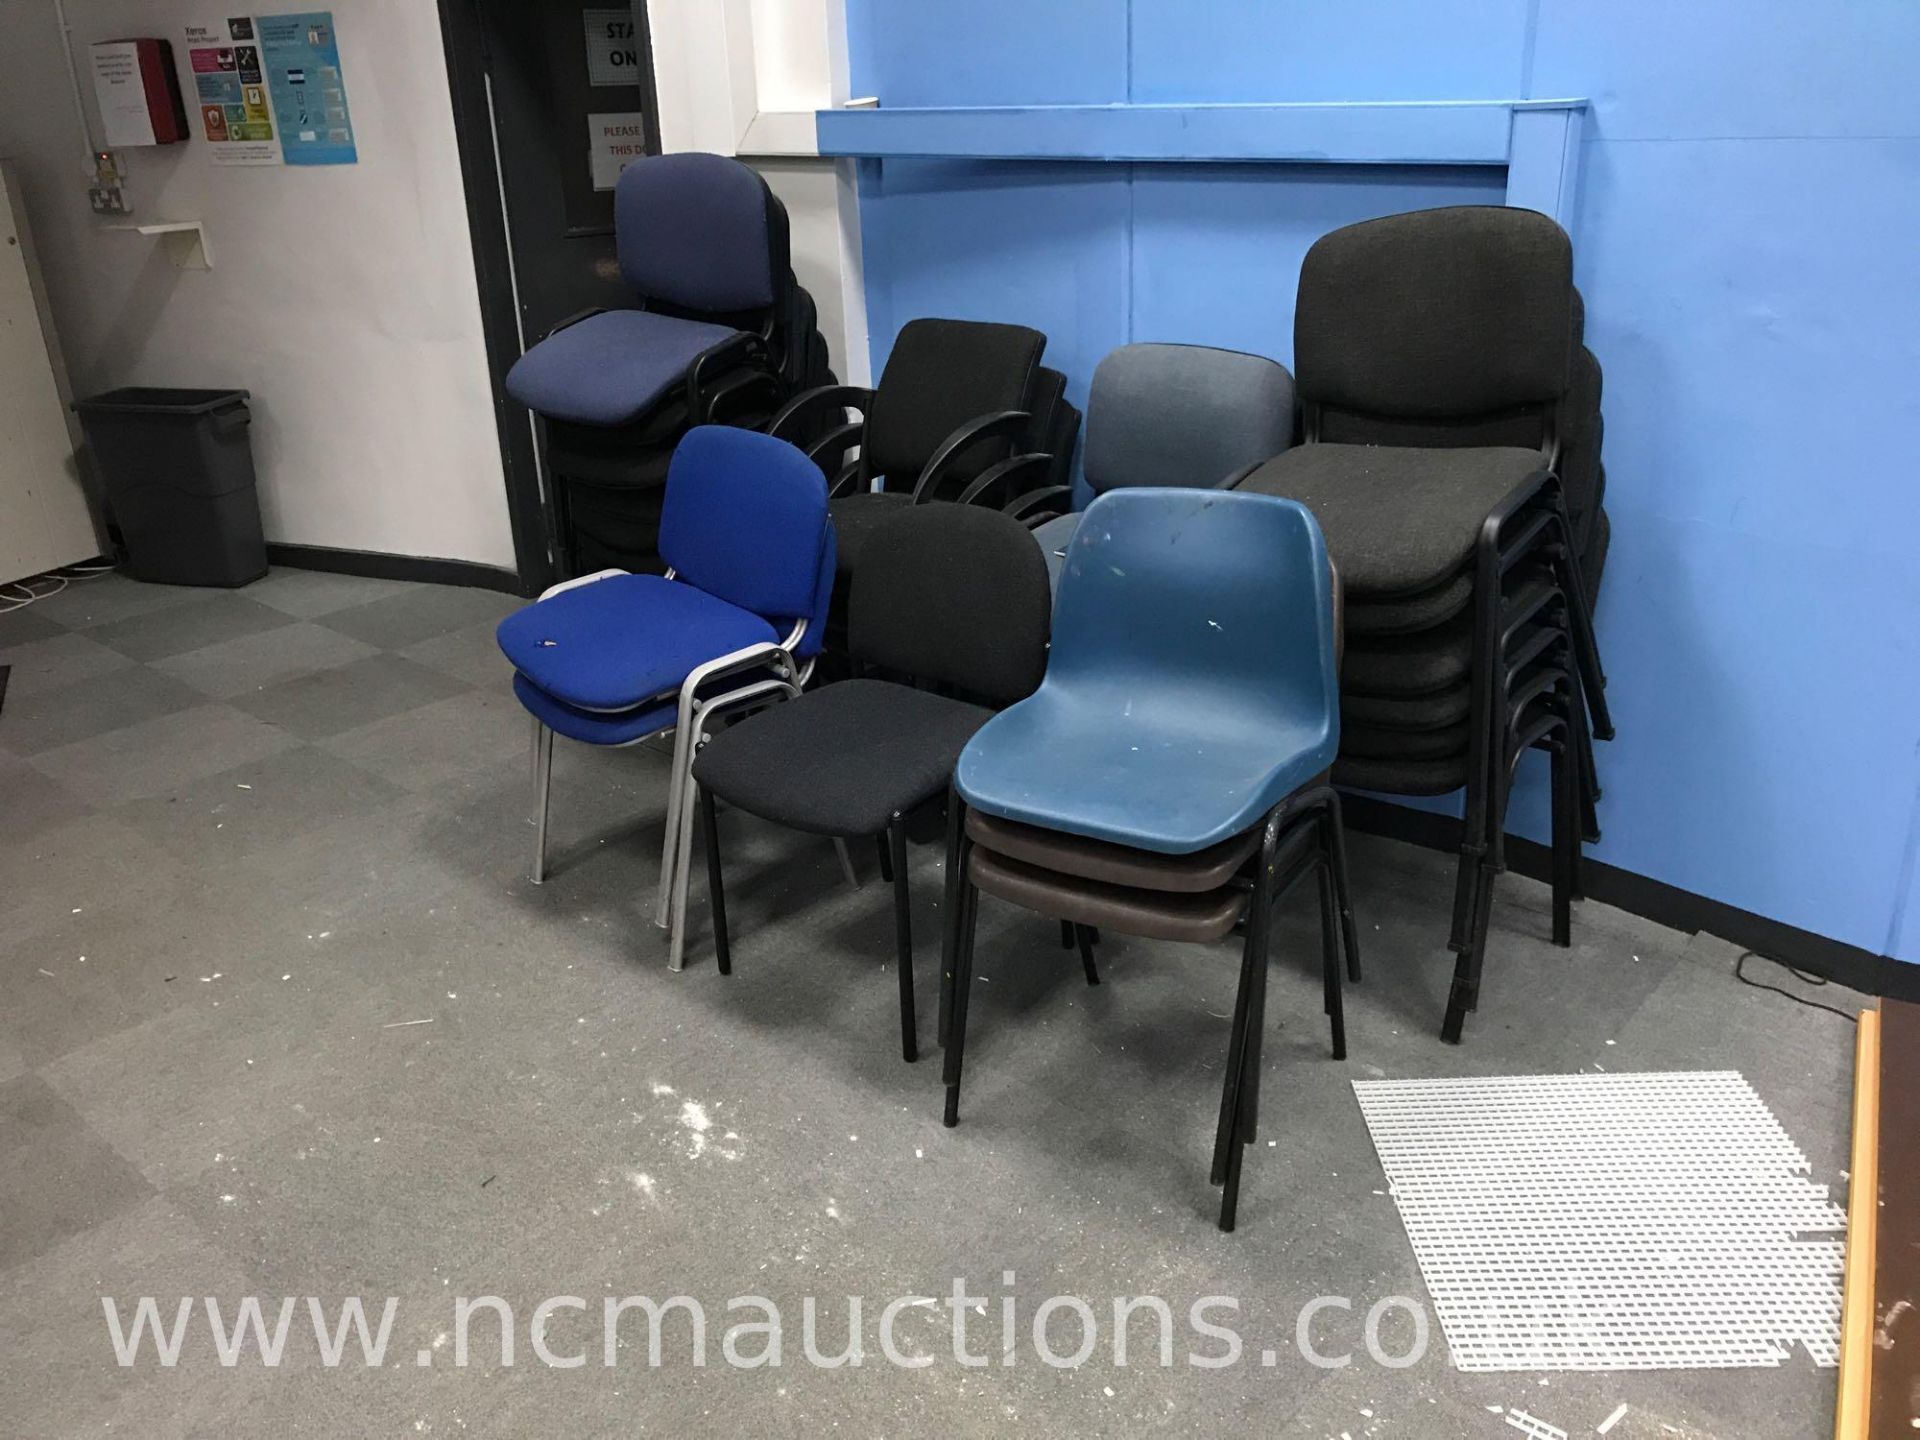 Office furniture and chairs - Image 10 of 16